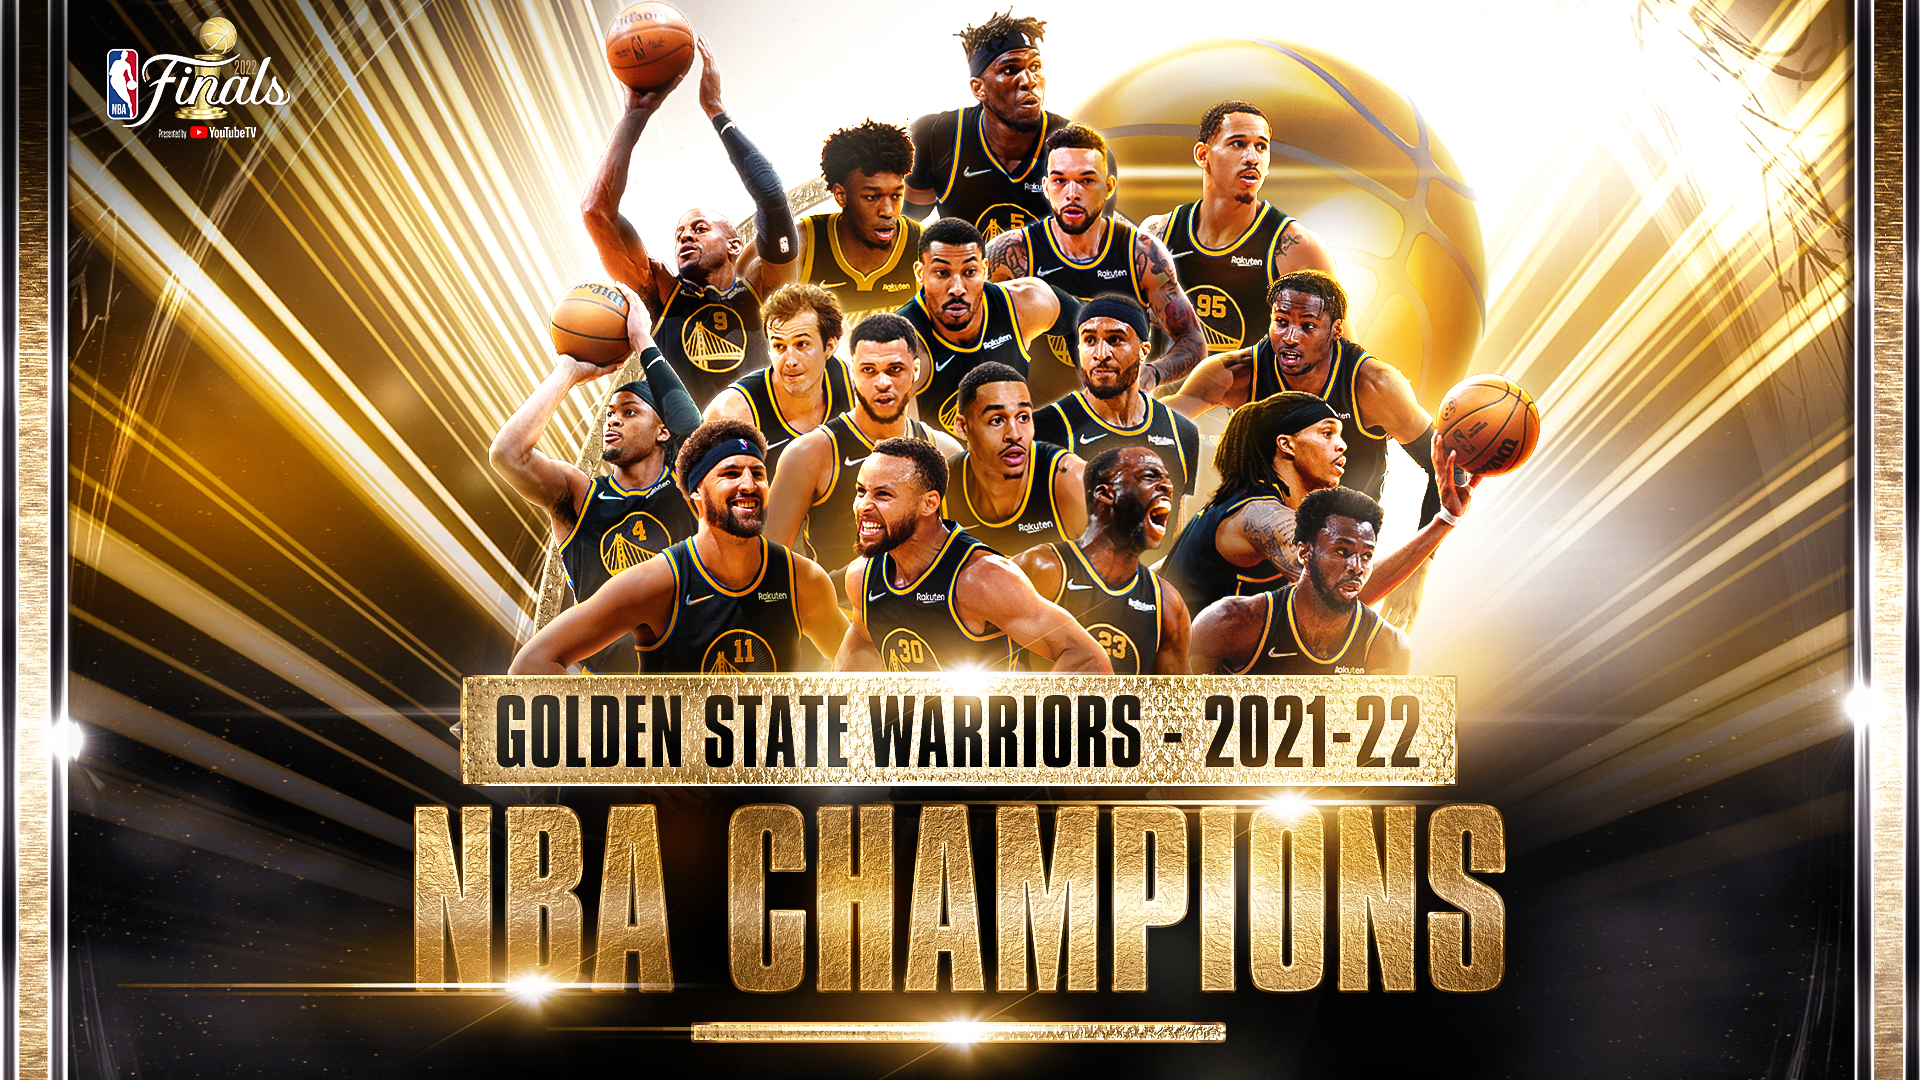 Download wallpapers Golden State Warriors flag 4k blue and yellow 3D  waves NBA american basketball team Golden State Warriors logo  basketball Golden State Warriors for desktop with resolution 3840x2400  High Quality HD